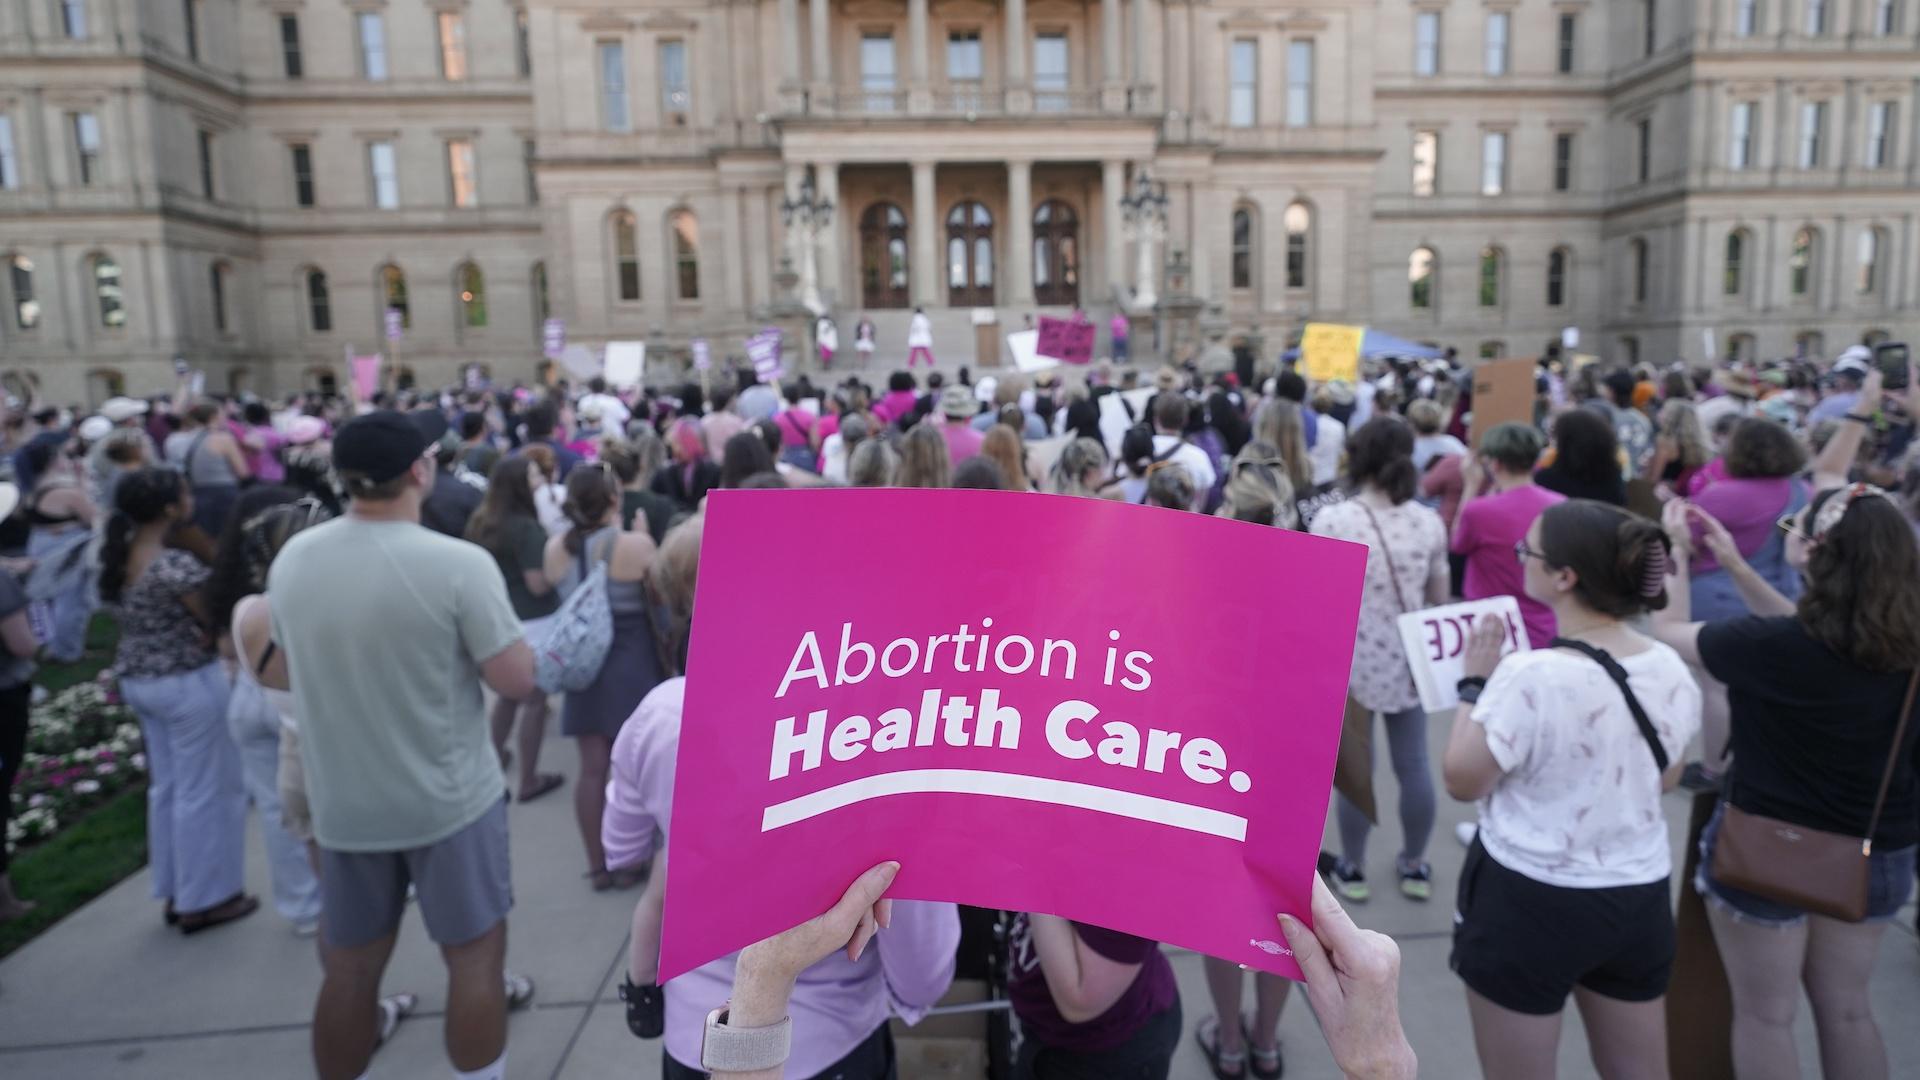 Abortion-rights protesters attend a rally following the United States Supreme Court's decision to overturn Roe v. Wade, the federally protected right to abortion, outside the state capitol in Lansing, Mich., Friday, June 24, 2022. (AP Photo/Paul Sancya, File)